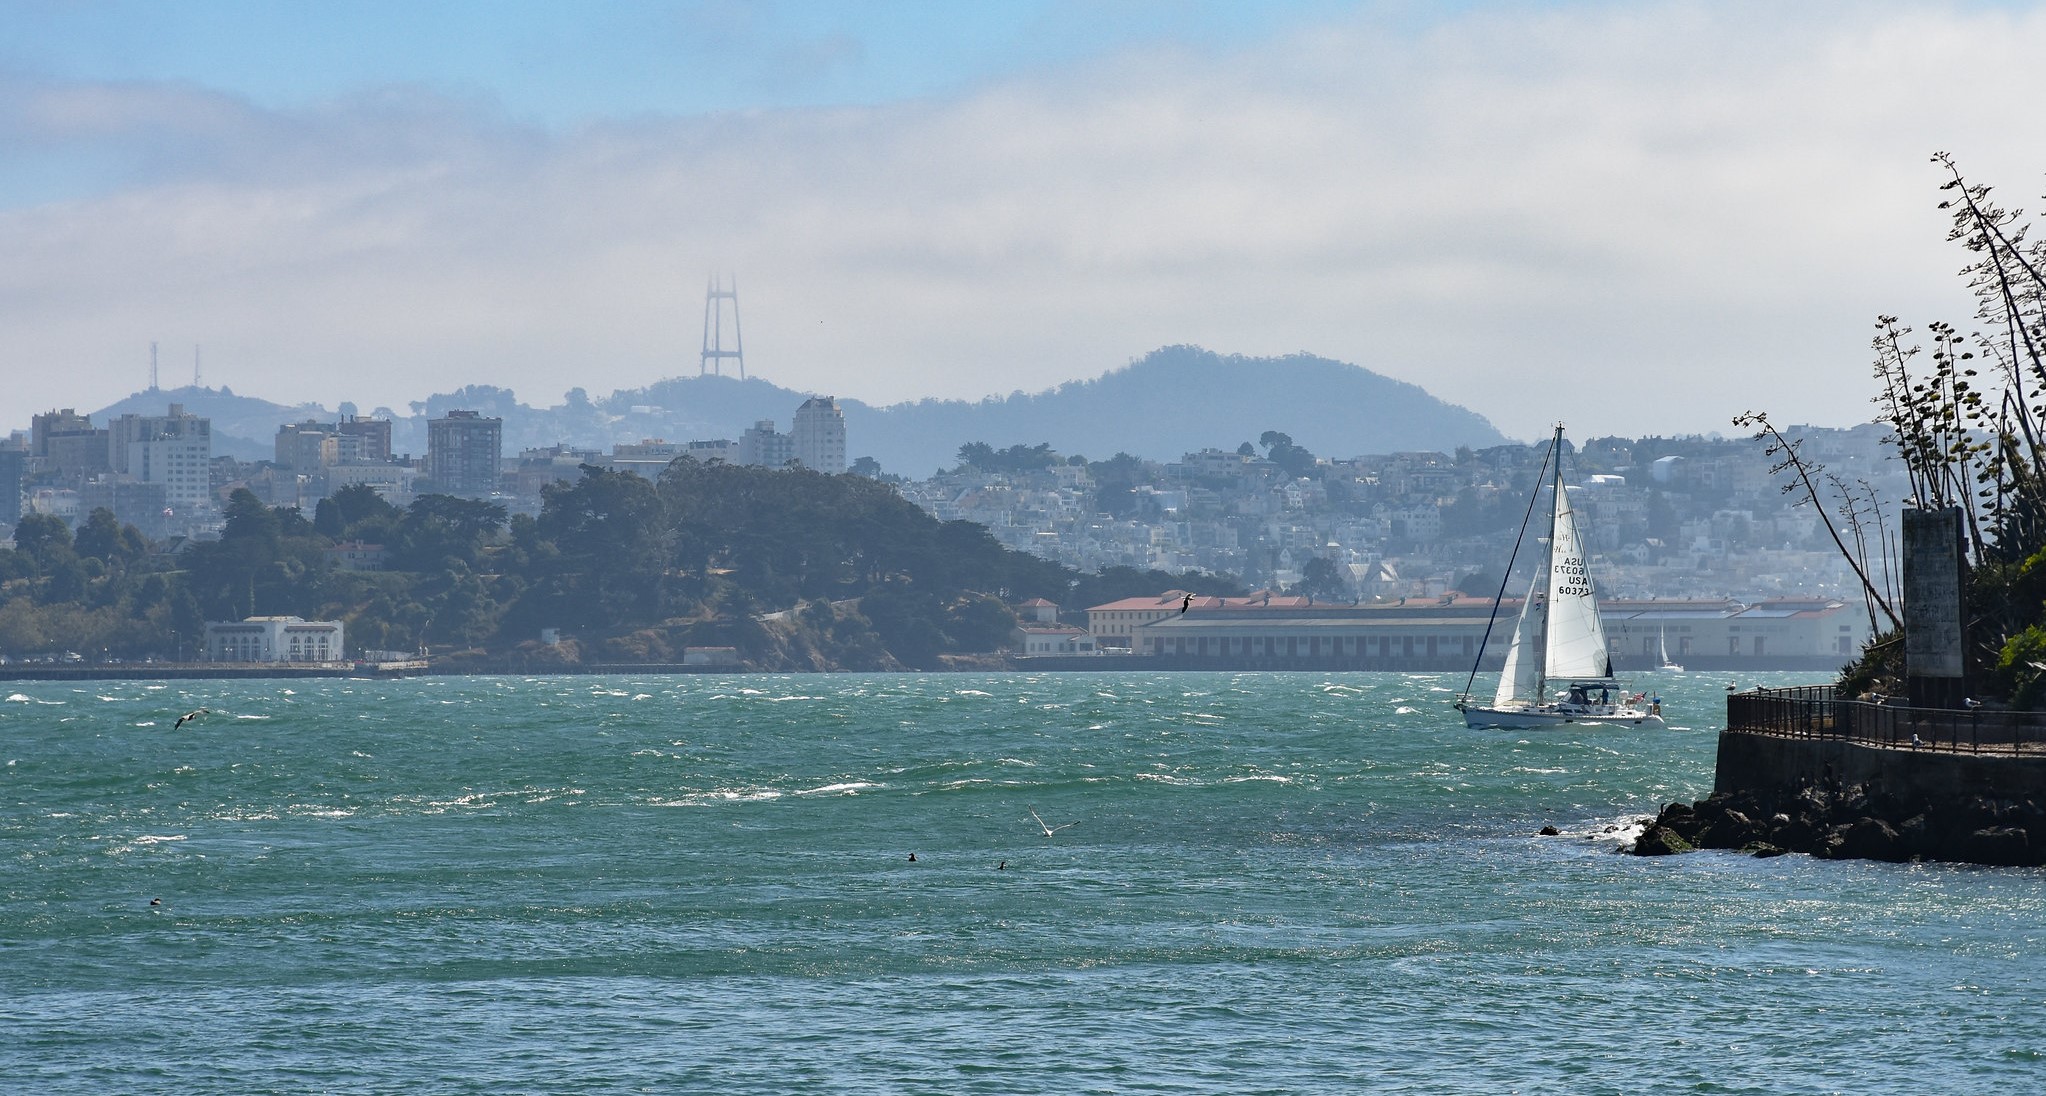 San Francisco Bay waters with a sailboat sailing across and Alcatraz island in the background.